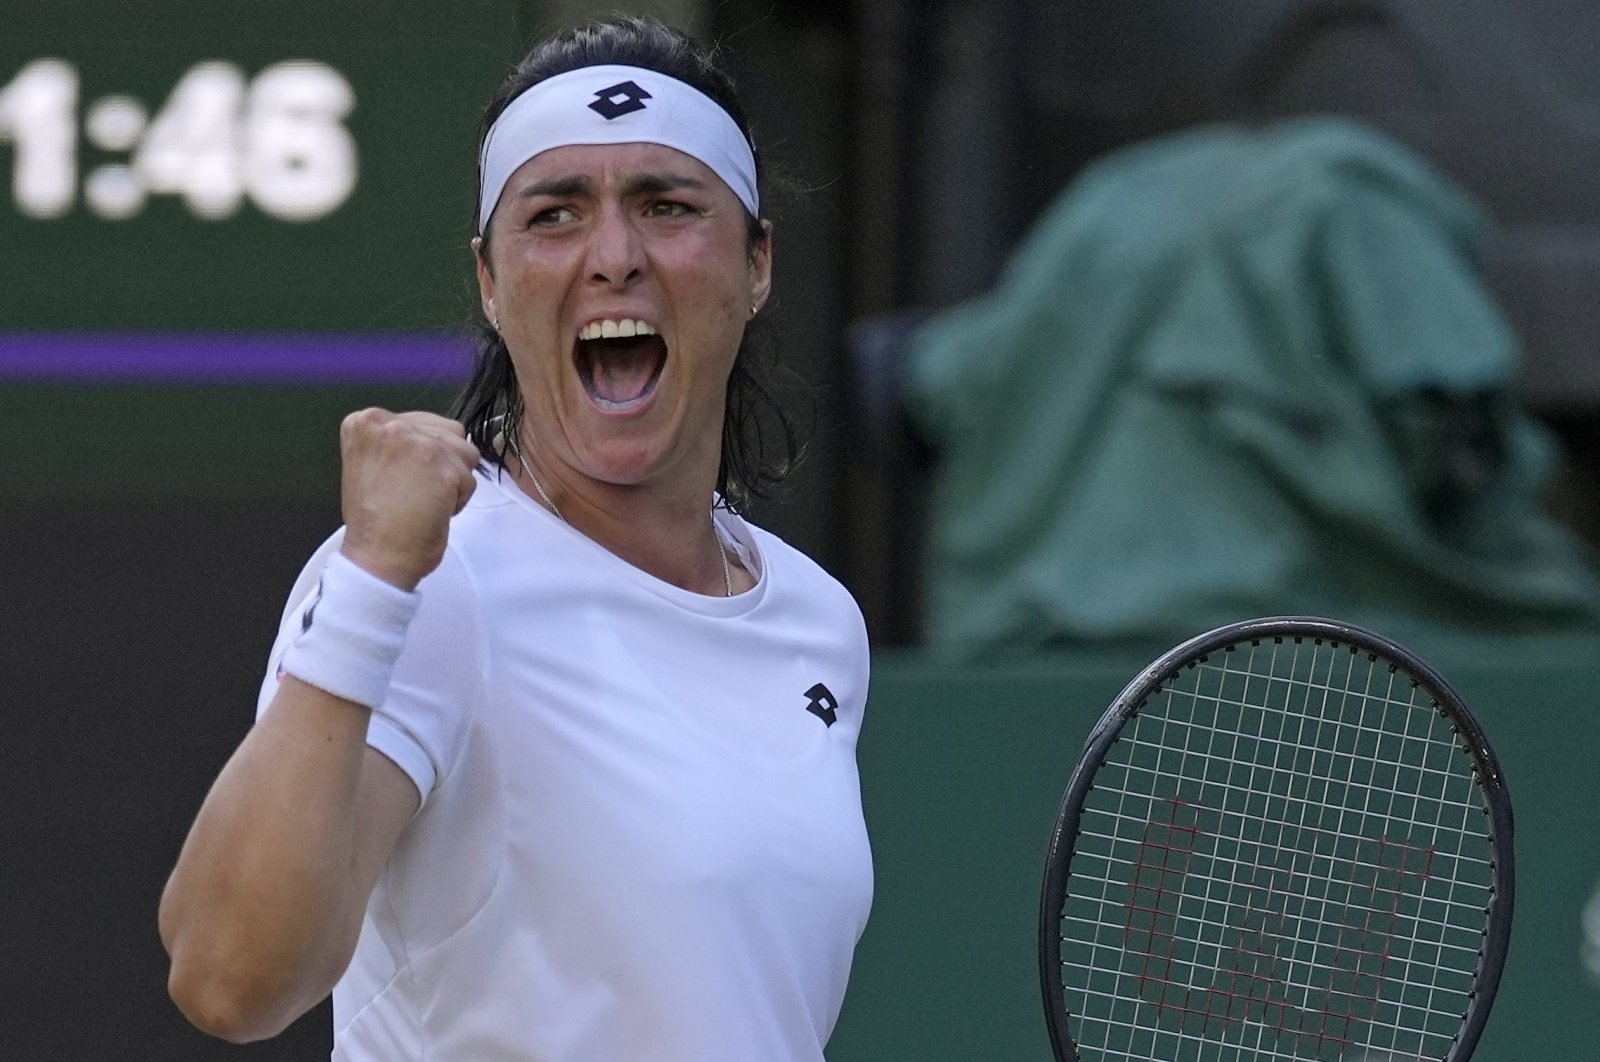 Ons Jabeur celebrates after winning a point against Marie Bouzkova in the Wimbledon women&#039;s singles quarterfinal, London, England, July 5, 2022. (AP Photo)